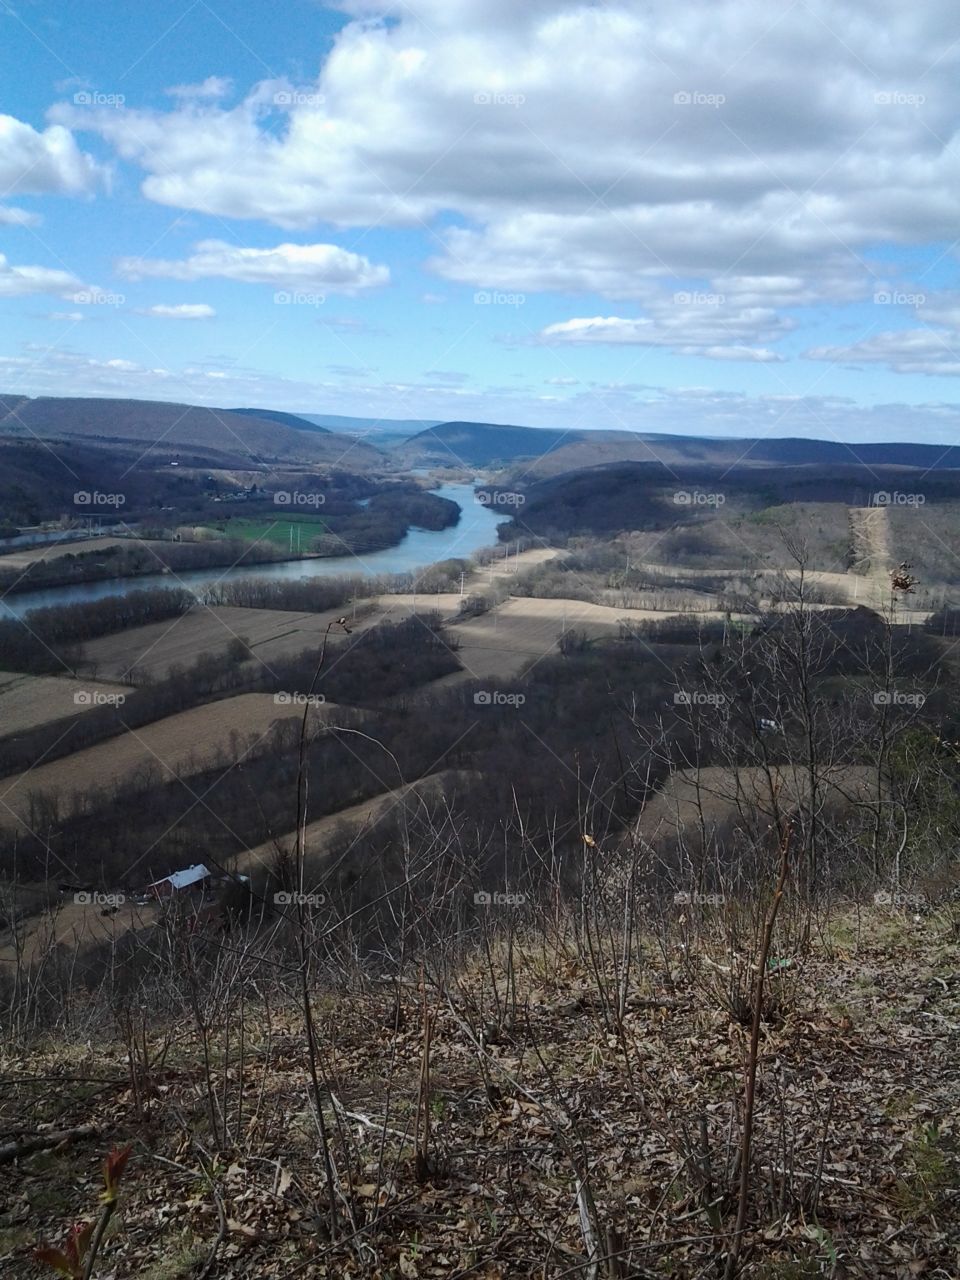 Susquehanna looking north from the top of Council Cup